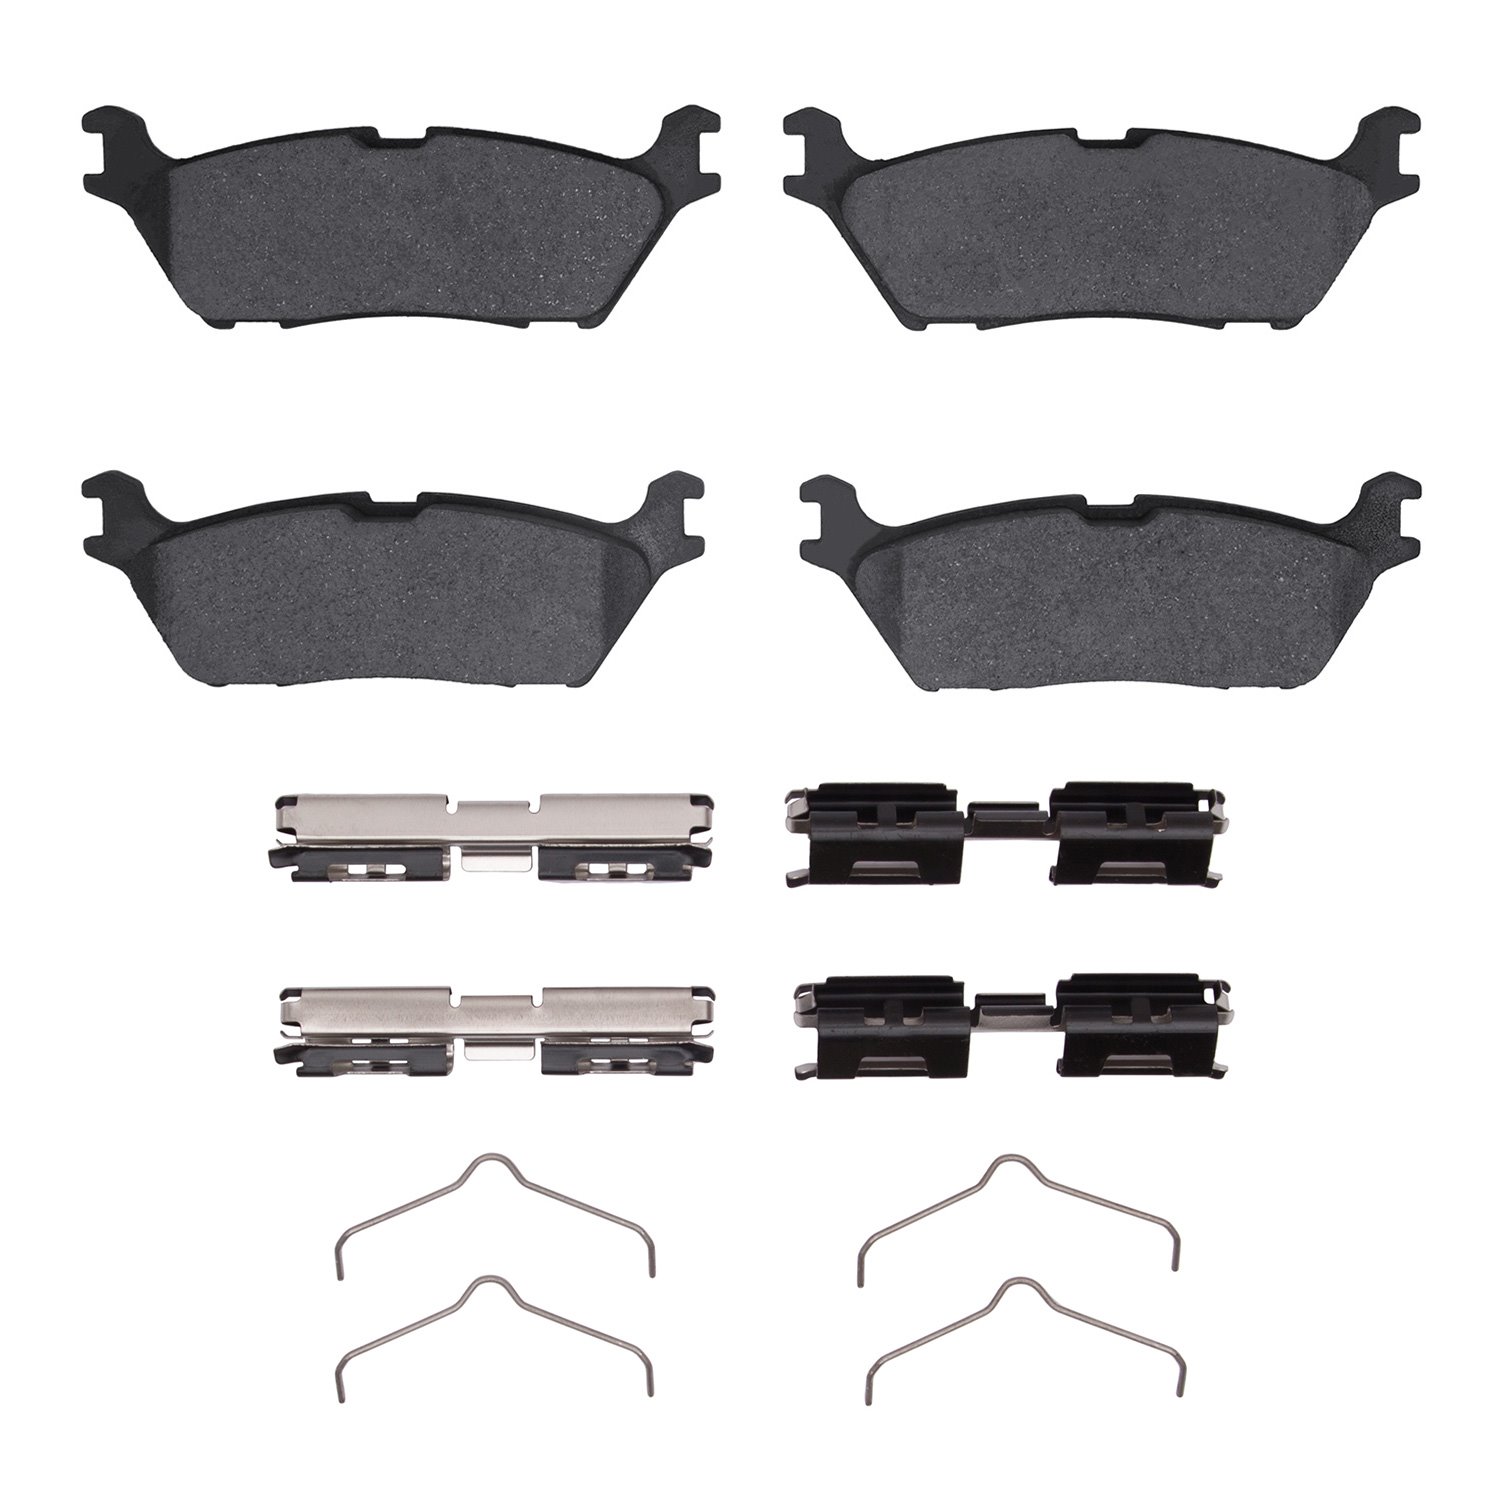 1400-2383-01 Ultimate-Duty Brake Pads & Hardware Kit, Fits Select Ford/Lincoln/Mercury/Mazda, Position: Rear